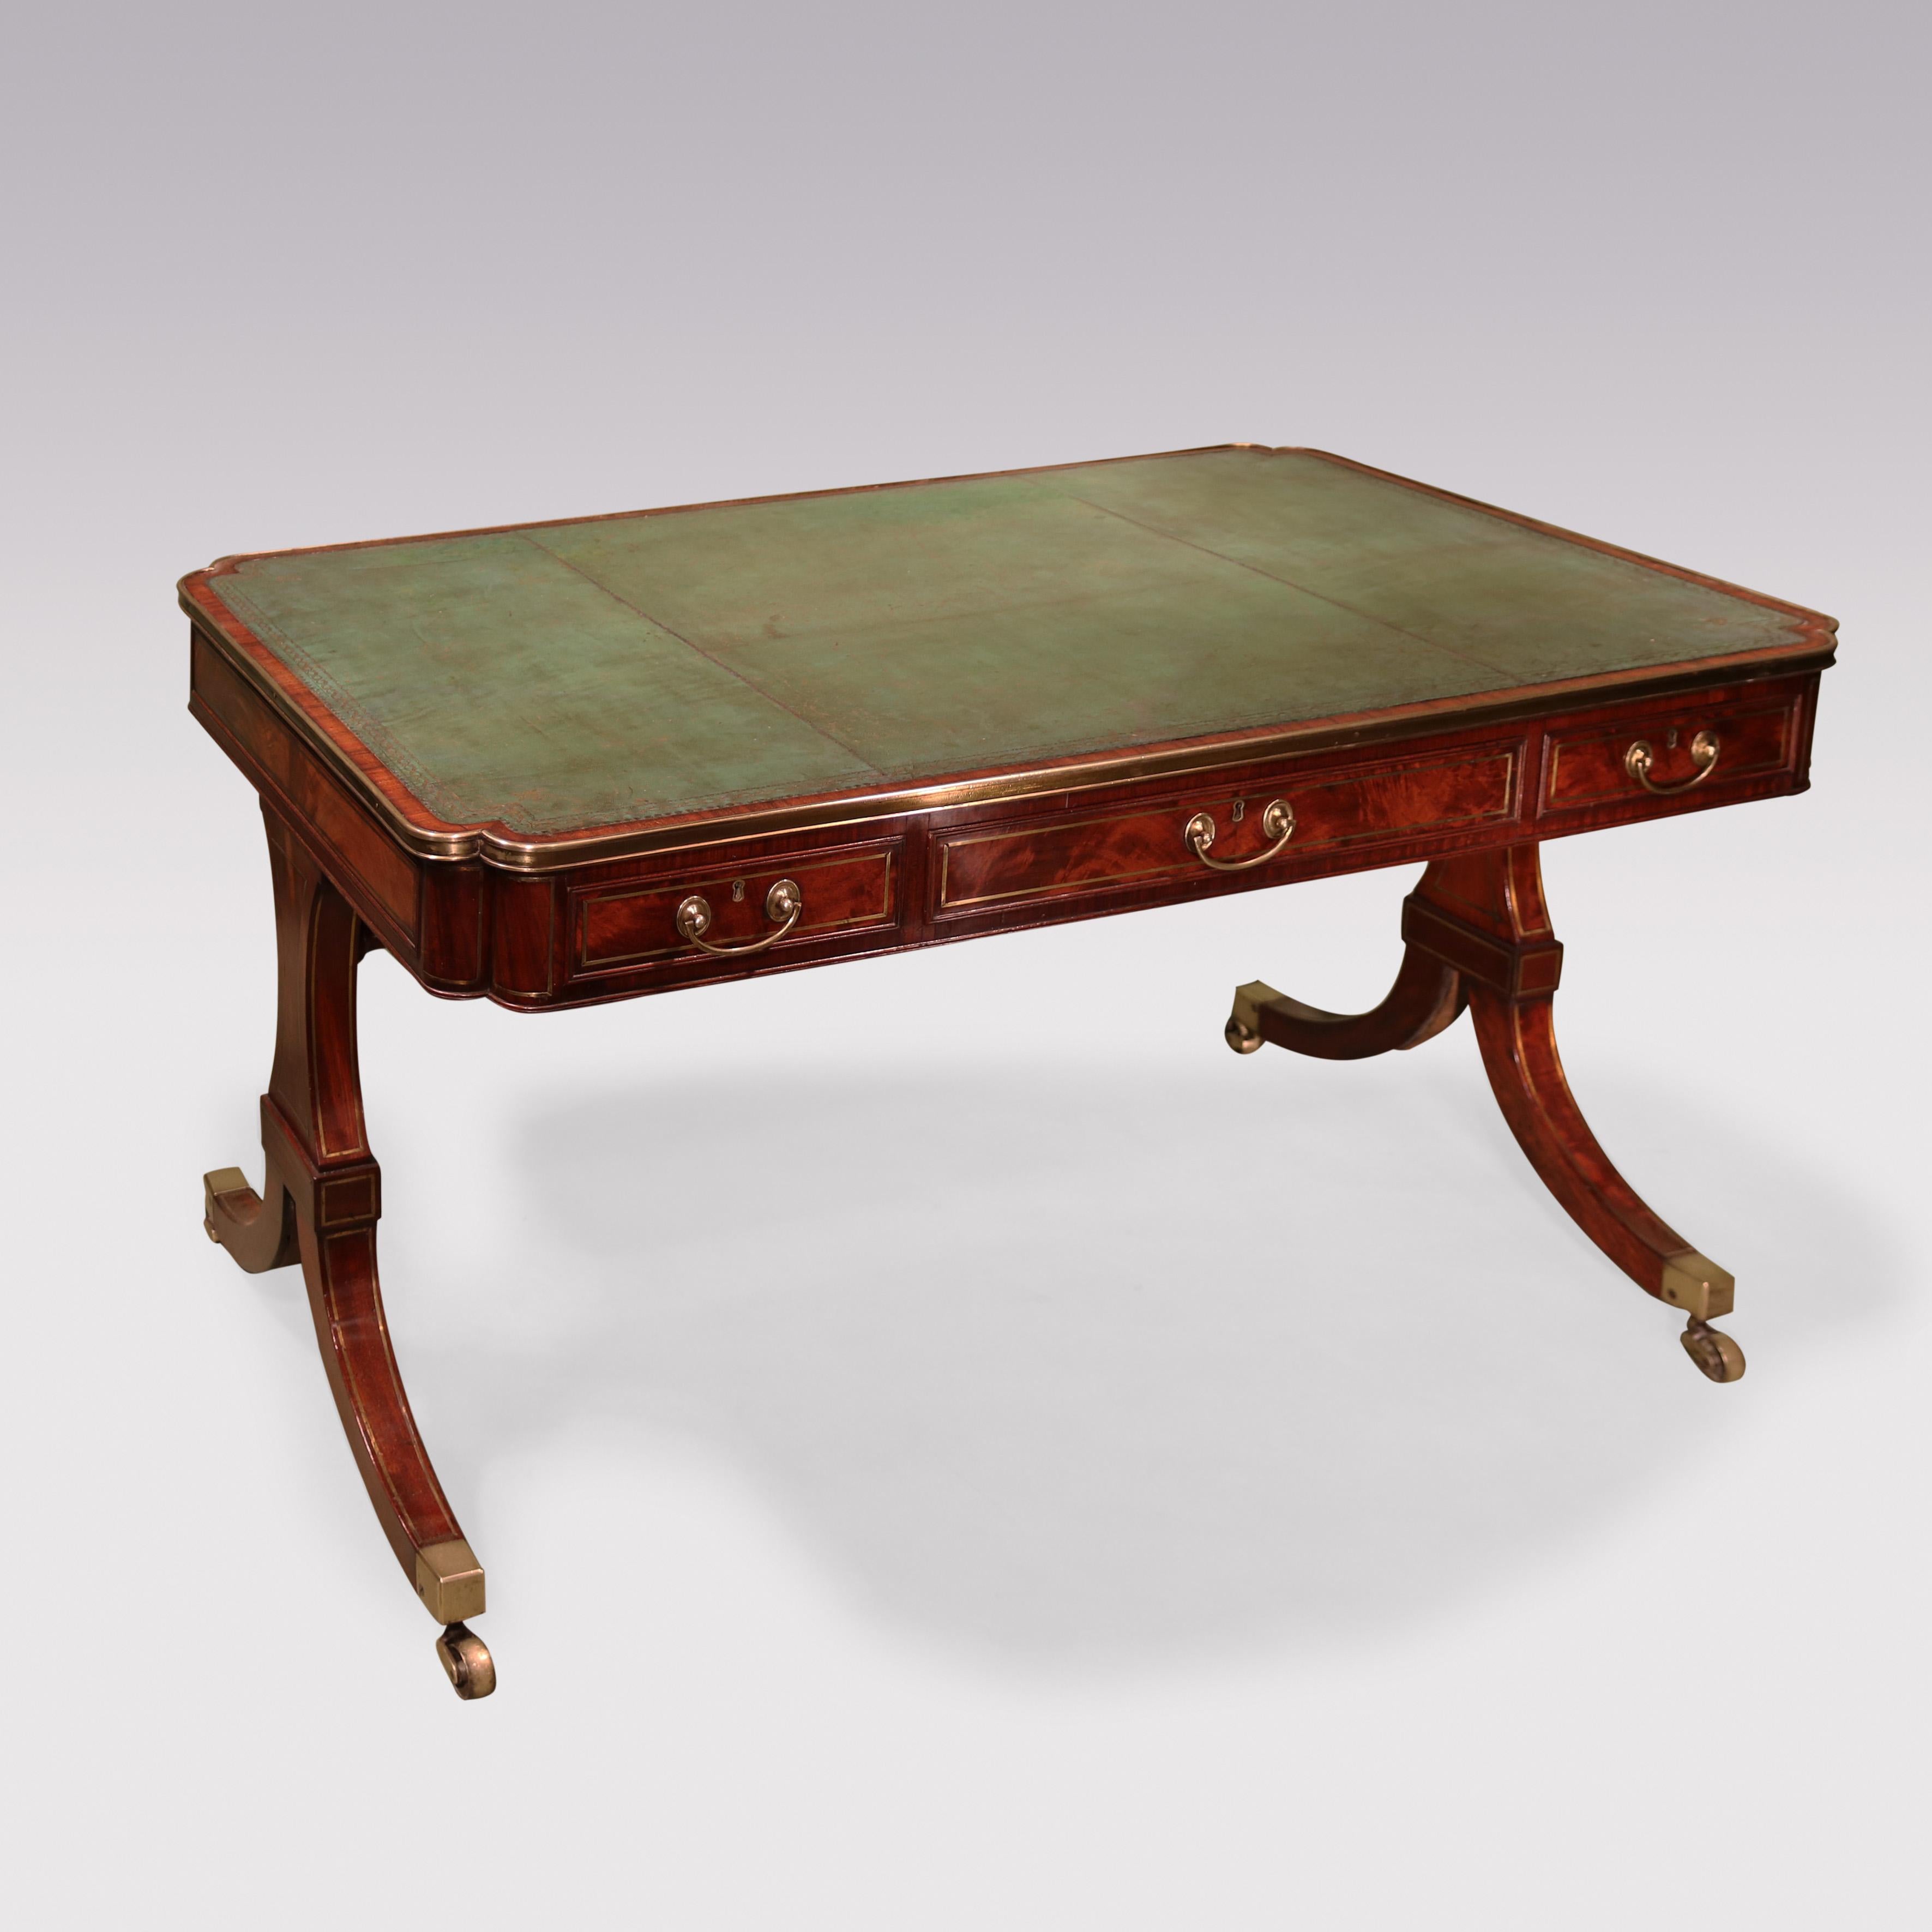 A fine quality early 19th century Regency period mahogany end support writing table, having brass line inlay throughout.  The table having a green tooled leather writing surface with gilt brass edging  and double lobed corners, fitted with six